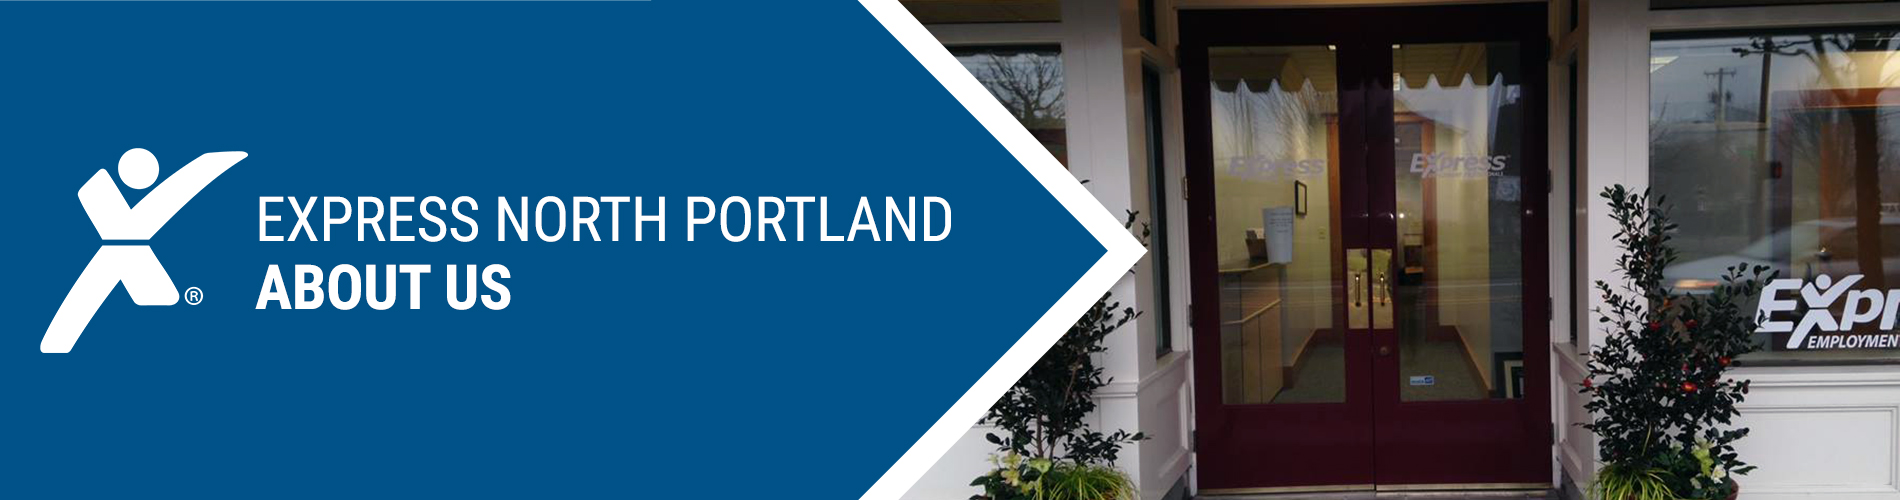 About Us - Express North Portland Employment Services